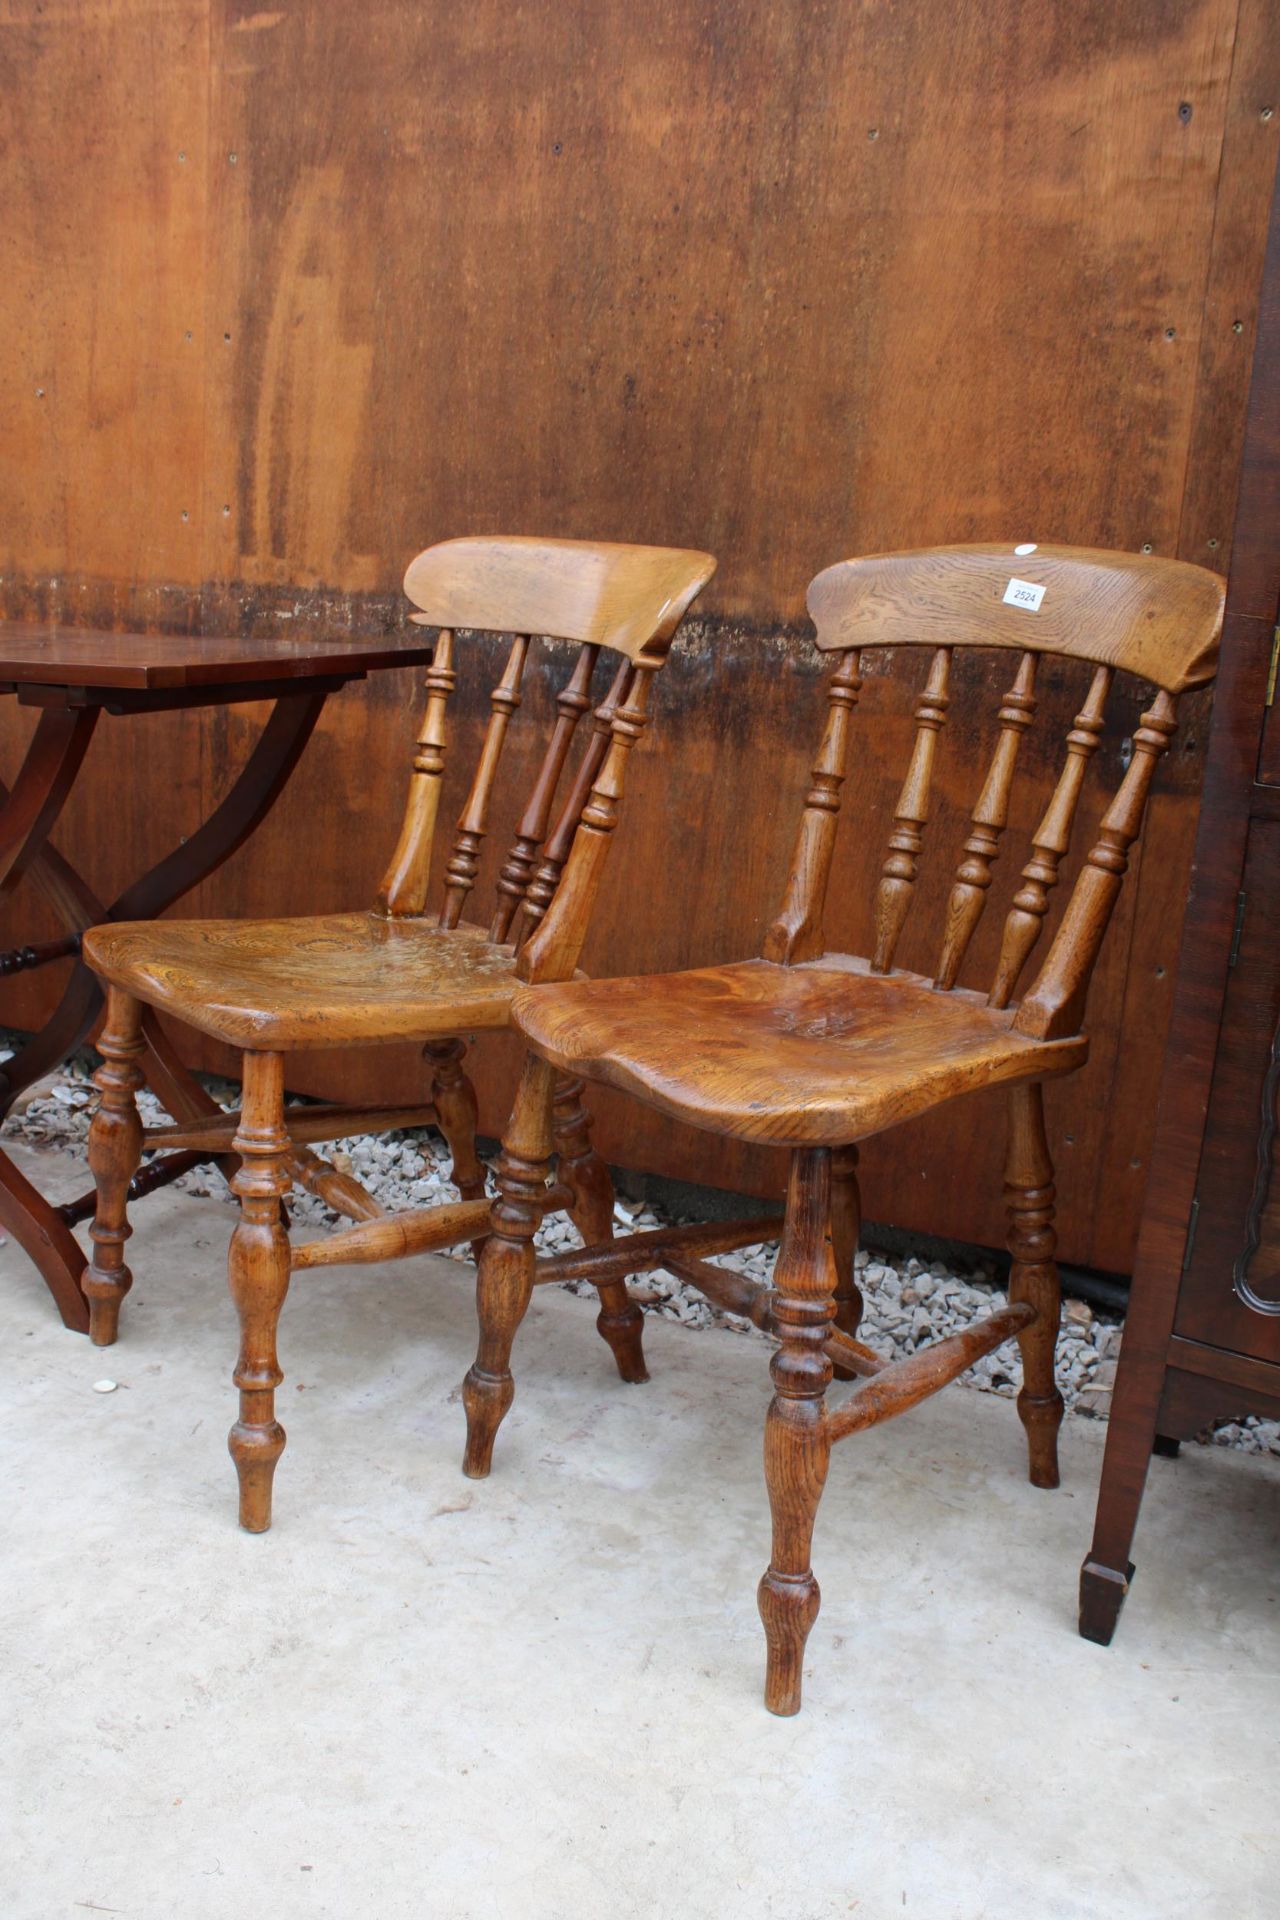 TWO VICTORIAN ELM KITCHEN CHAIRS WITH TURNED LEGS AND UPRIGHTS - Image 3 of 3